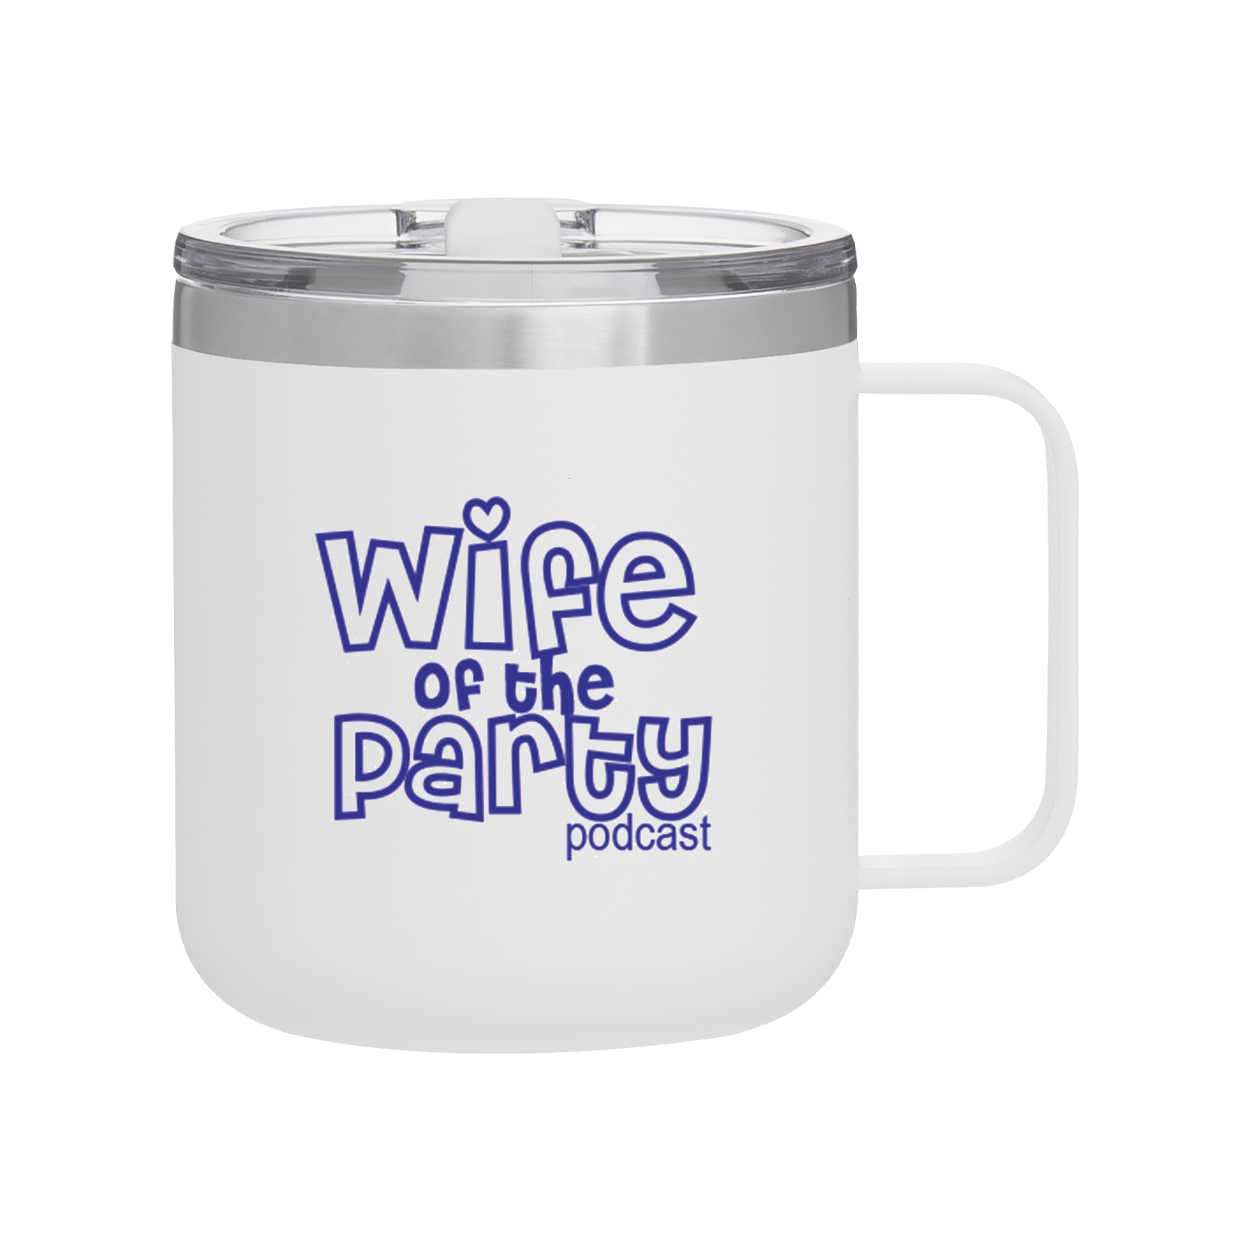 Wife Of The Party Thermal Mug